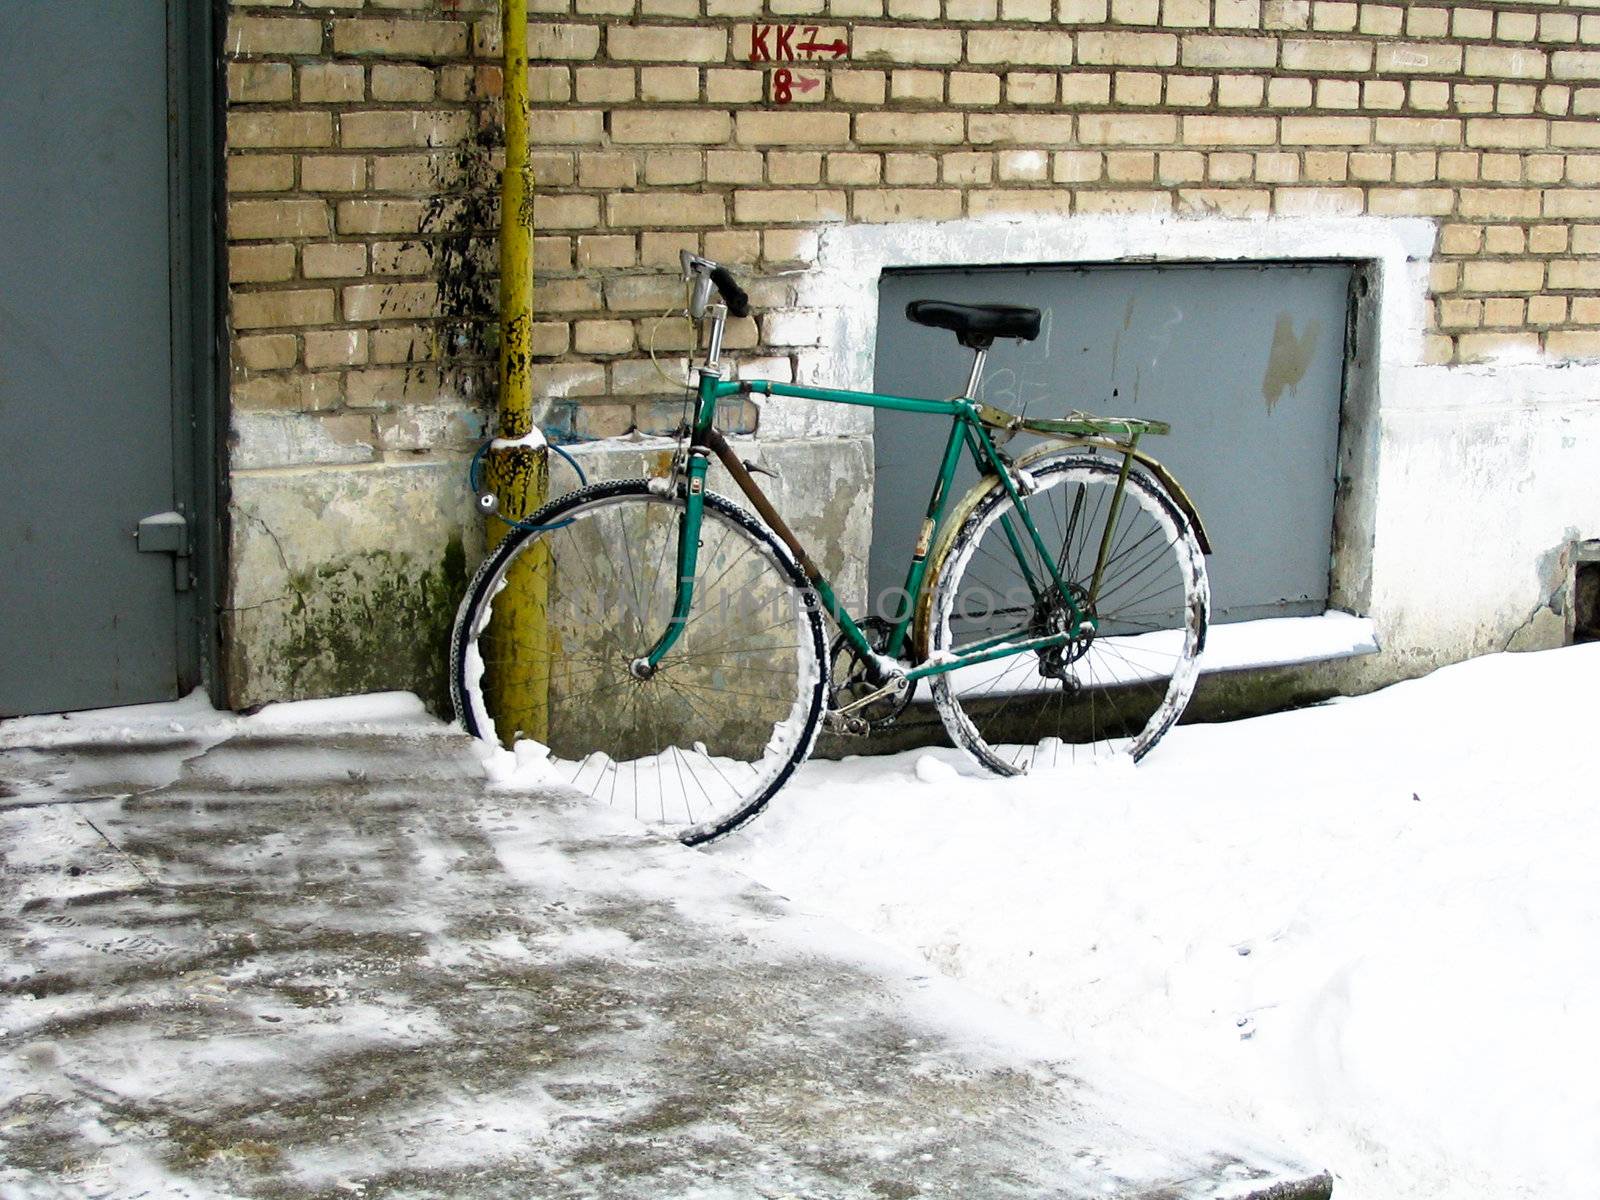 The bicycle standing at a wall of the brick house in the winter